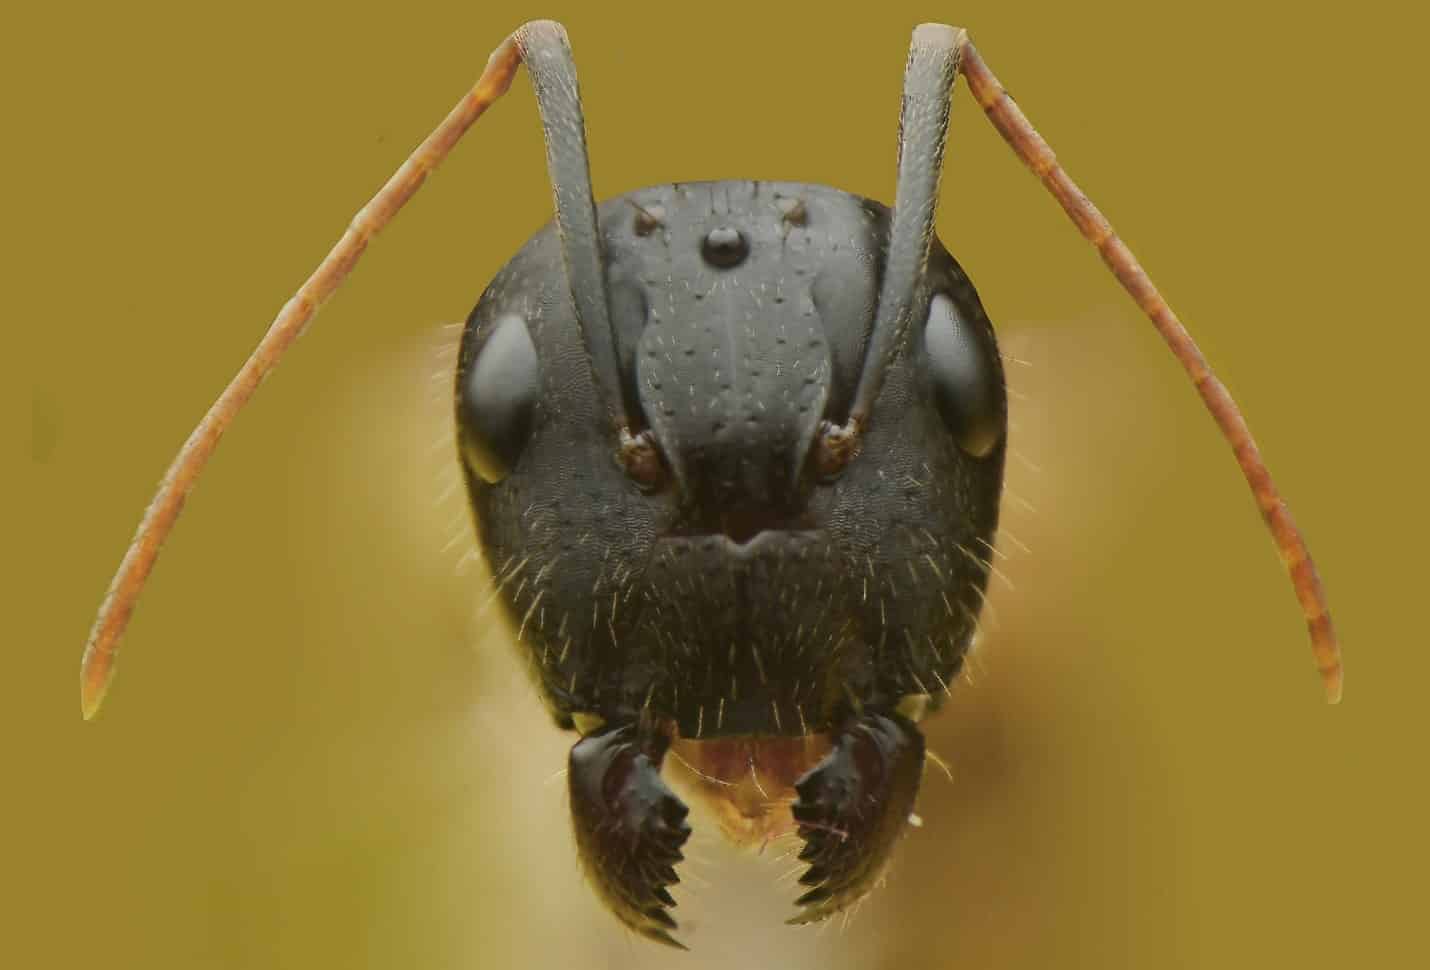 A close-up picture of a carpenter ant's head, with black pincers and red antennae showing